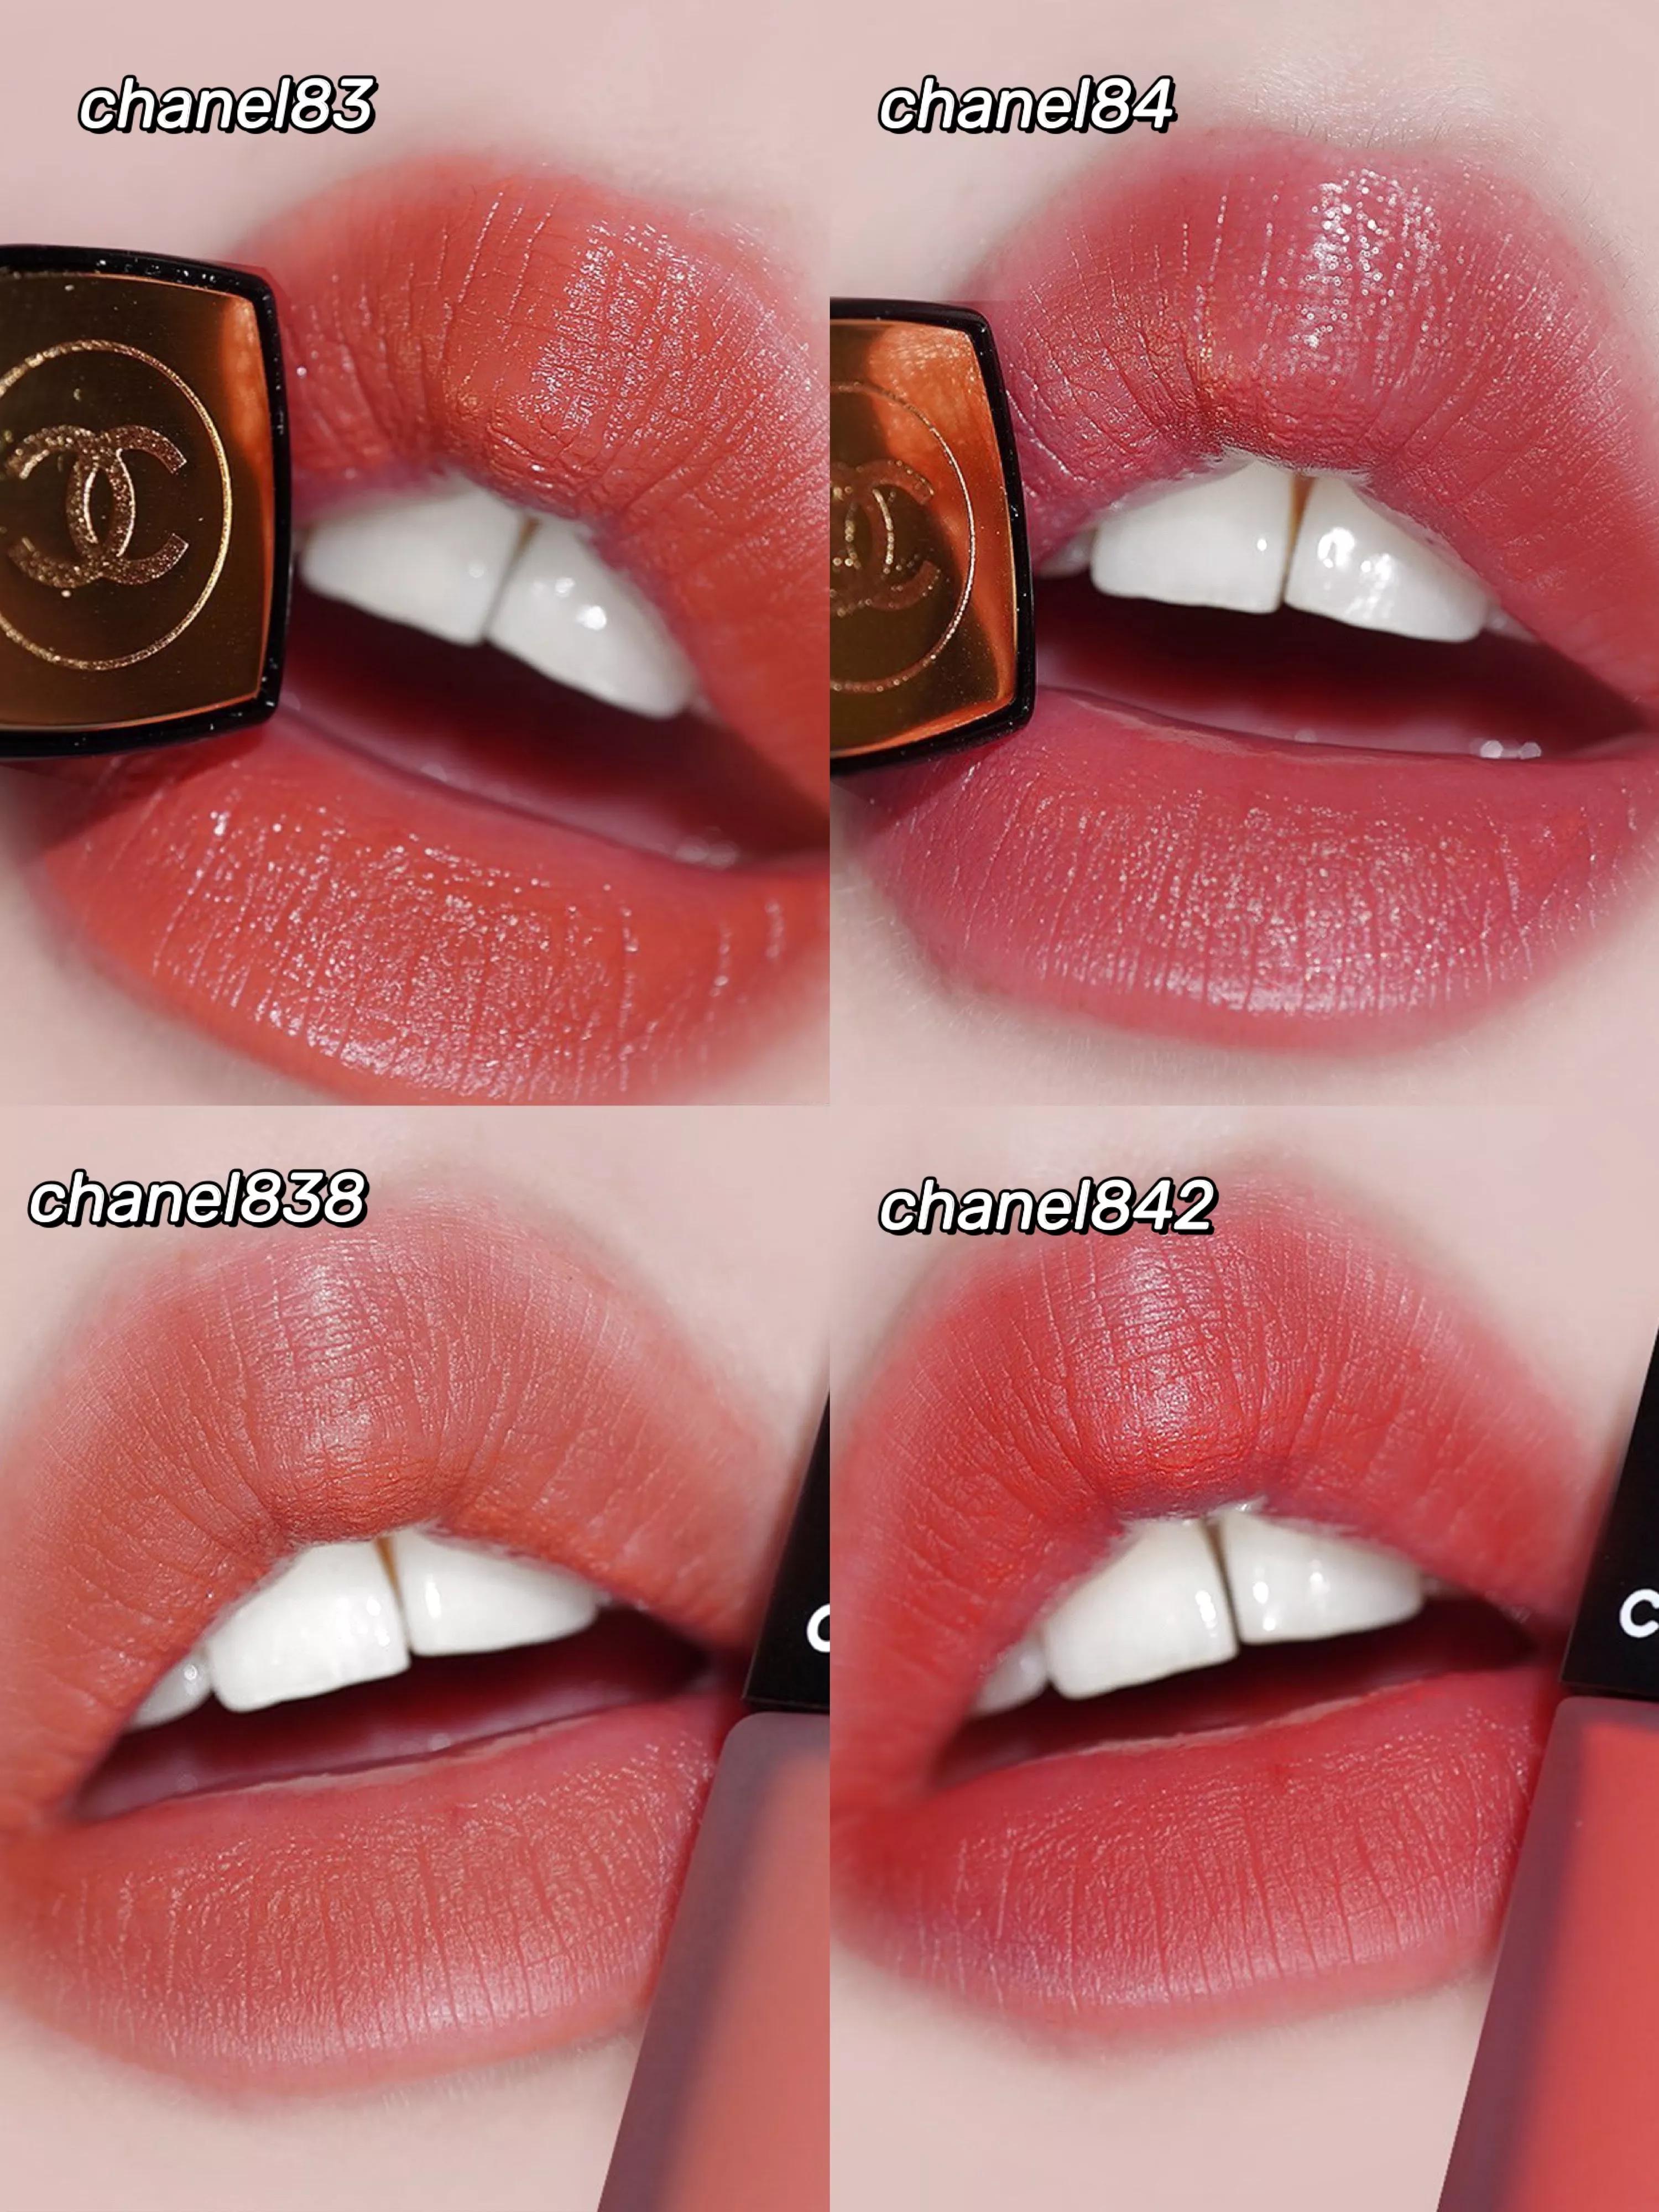 Chanel lip glaze new color test color sharing - iNEWS